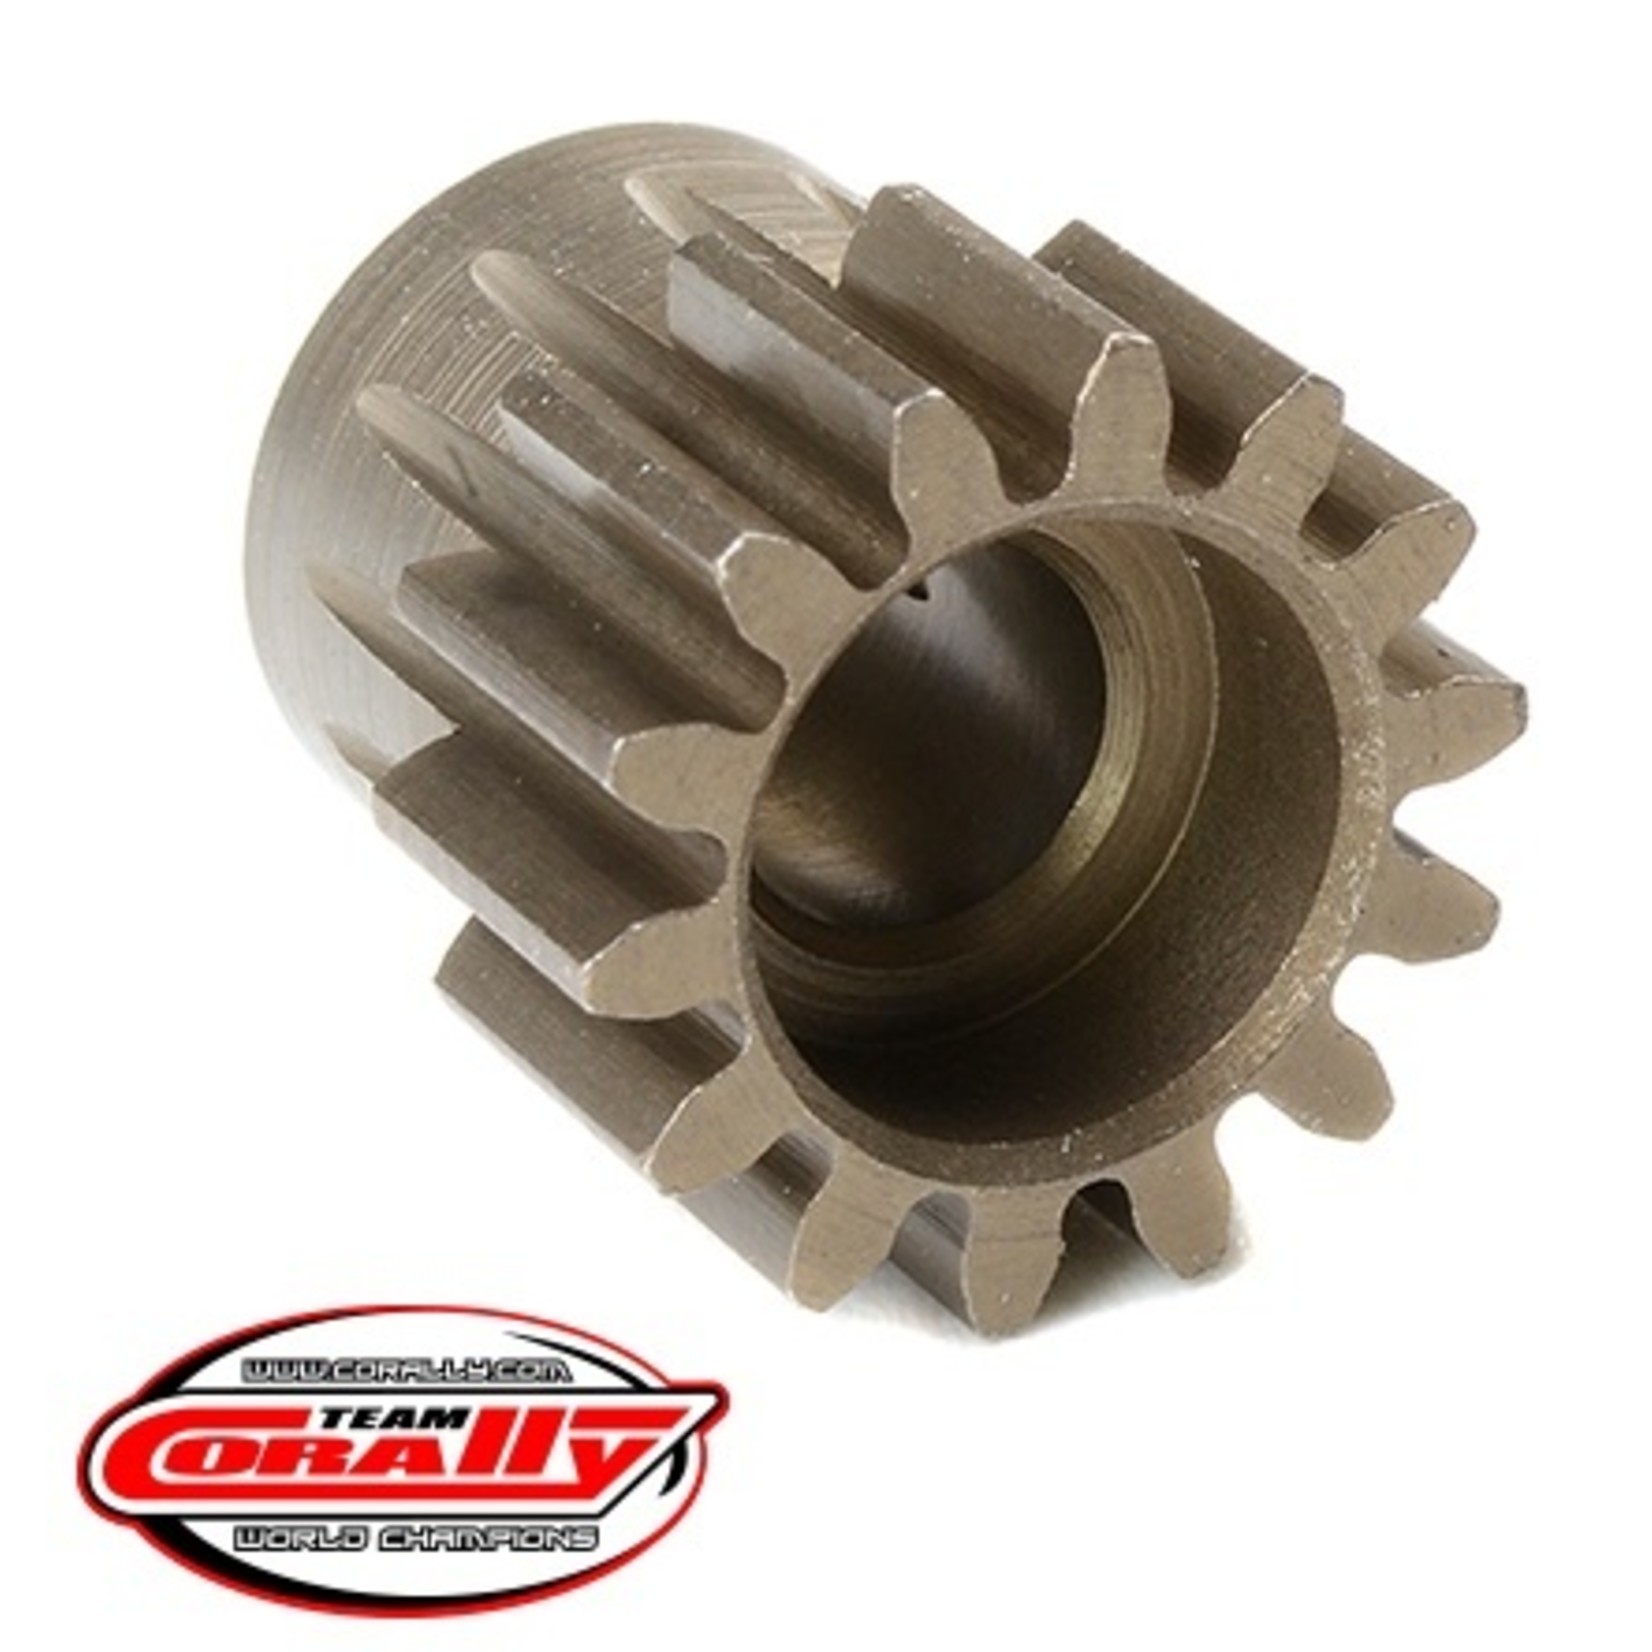 Corally (Team Corally) 32 Pitch Pinion - Short - Hardened Steel - 14 Tooth -